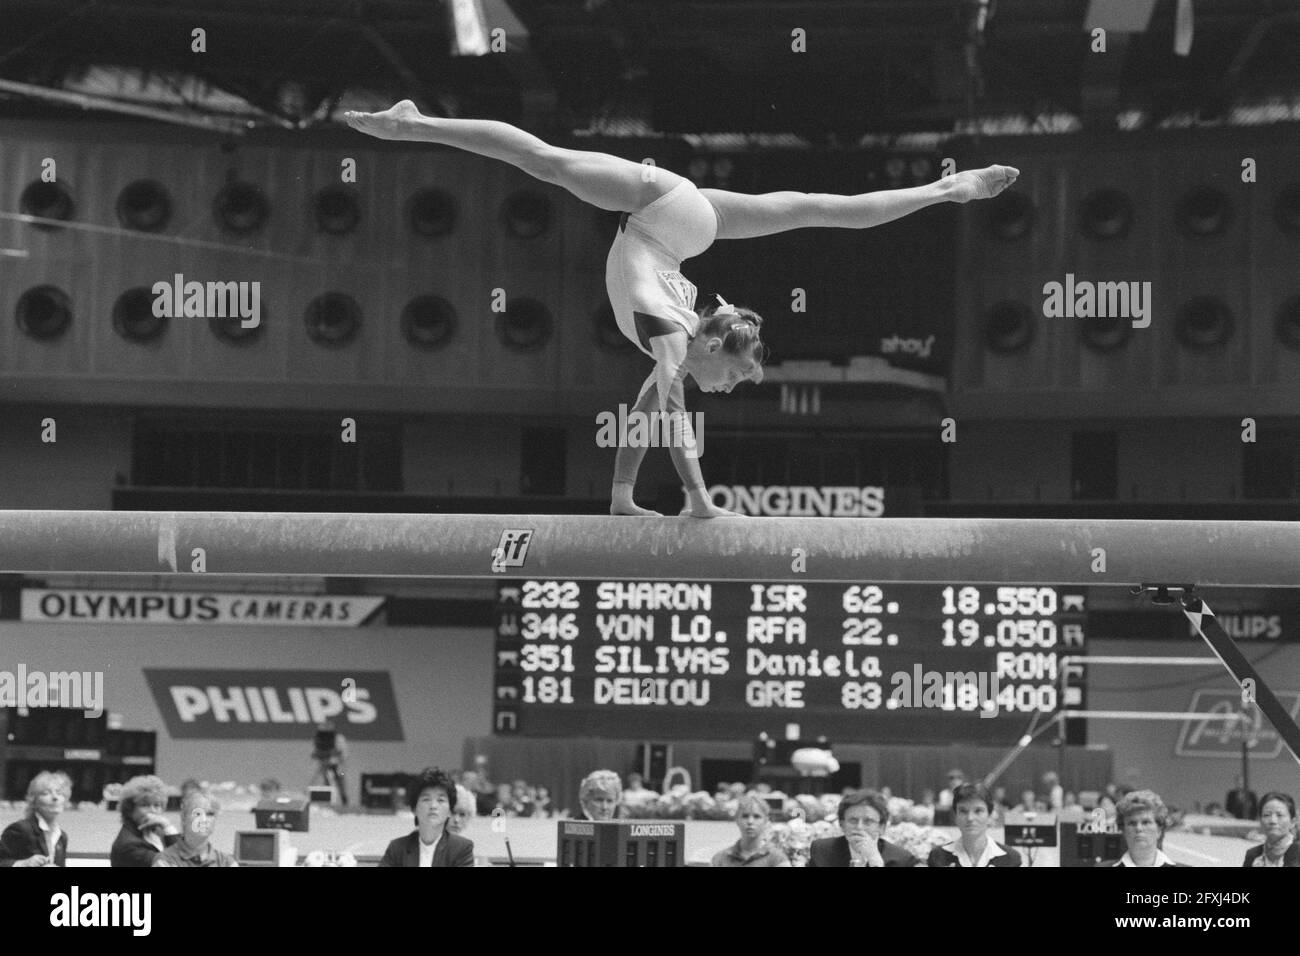 World Championships gymnastics in Rotterdam; Romanian Daniele Silivas in action, October 21, 1987, TURN, championships, The Netherlands, 20th century press agency photo, news to remember, documentary, historic photography 1945-1990, visual stories, human history of the Twentieth Century, capturing moments in time Stock Photo